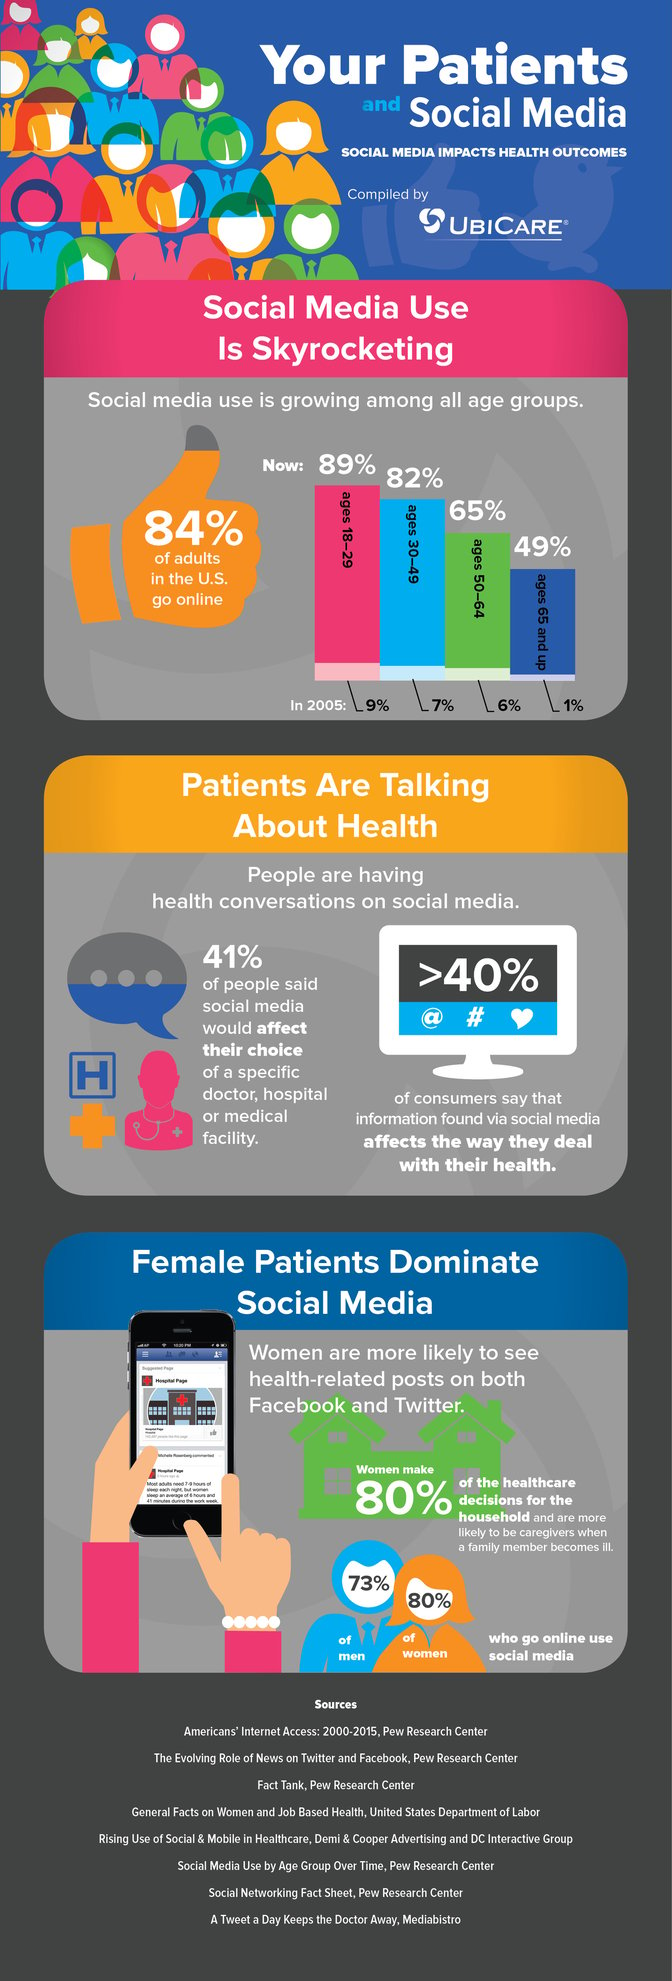 Your_Patients_and_Social_Media_infographic.jpg